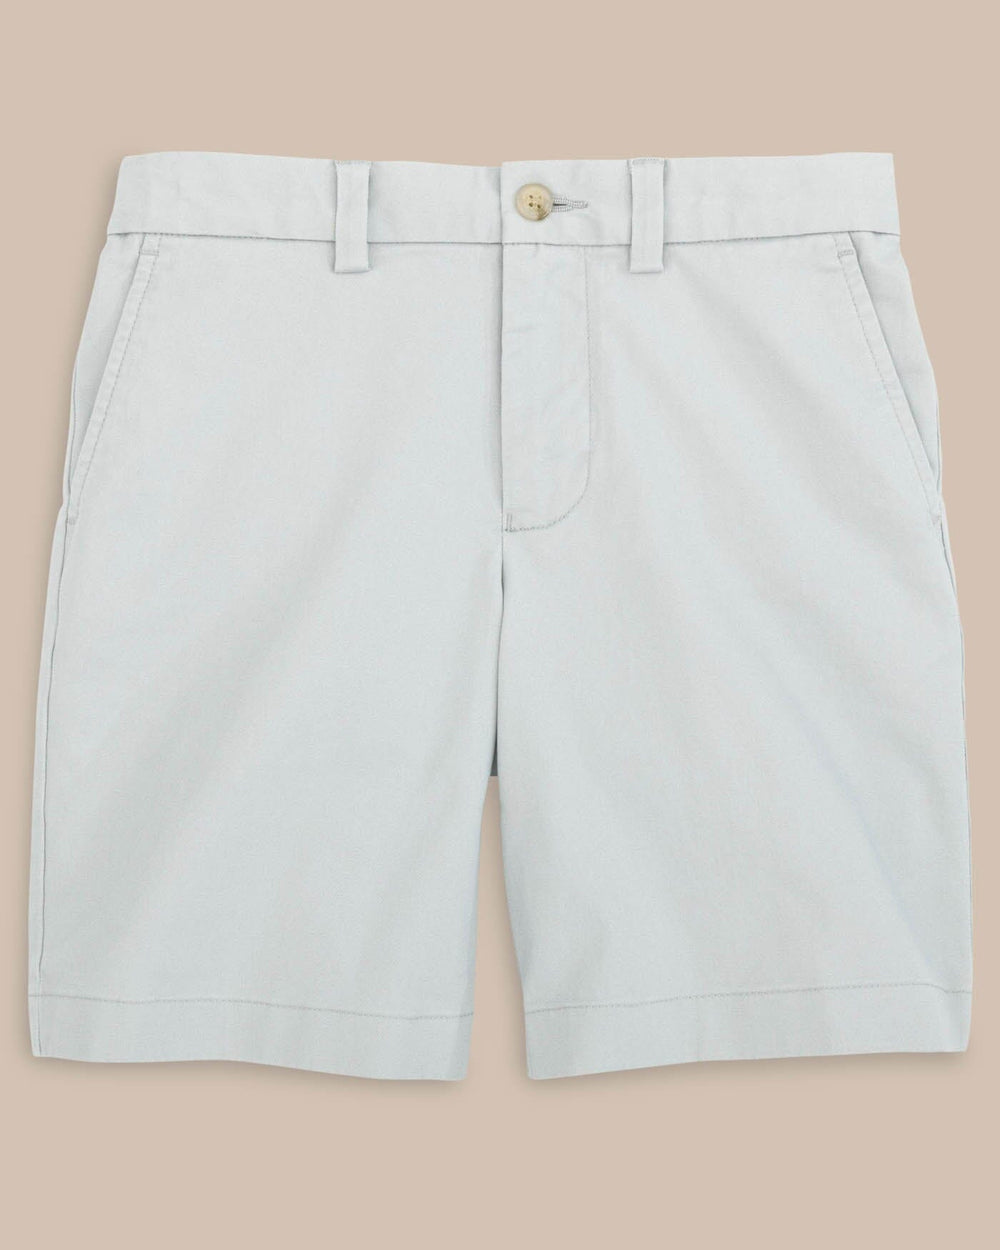 The front view of the Boys Channel Marker Short by Southern Tide - Seagull Grey